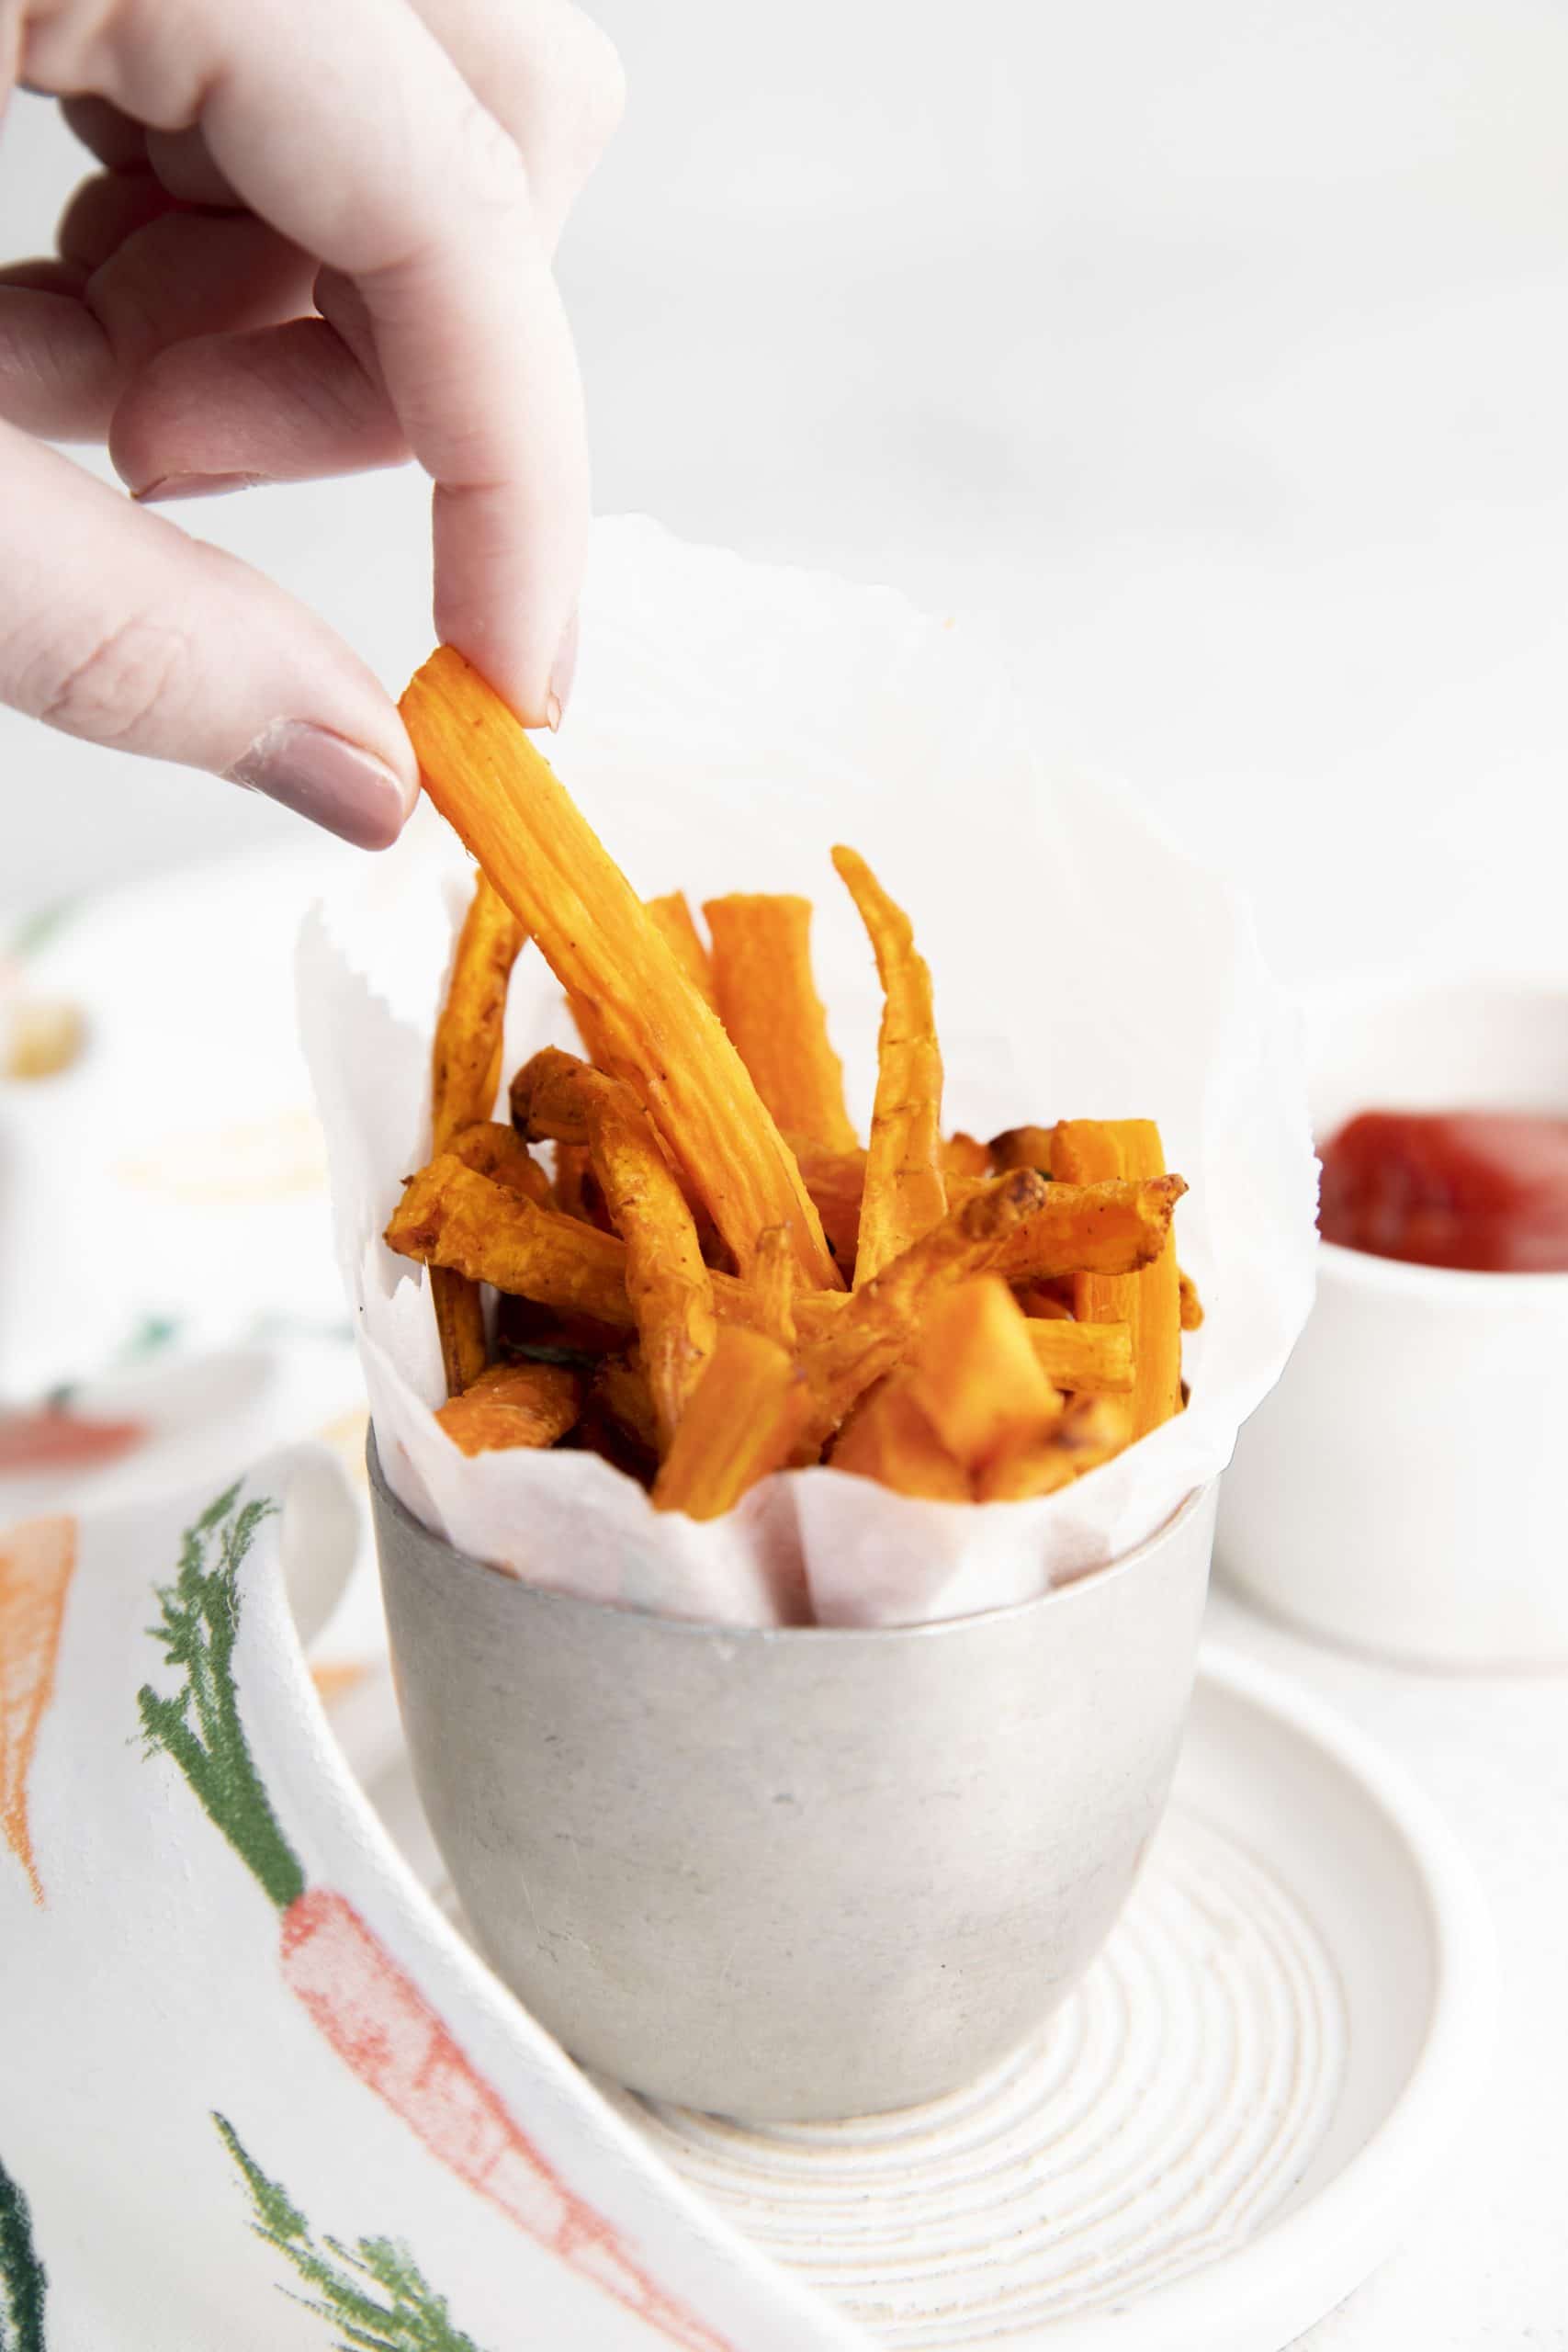 a hand picking up a carrot fry out of a cup full of air fryer carrot fries